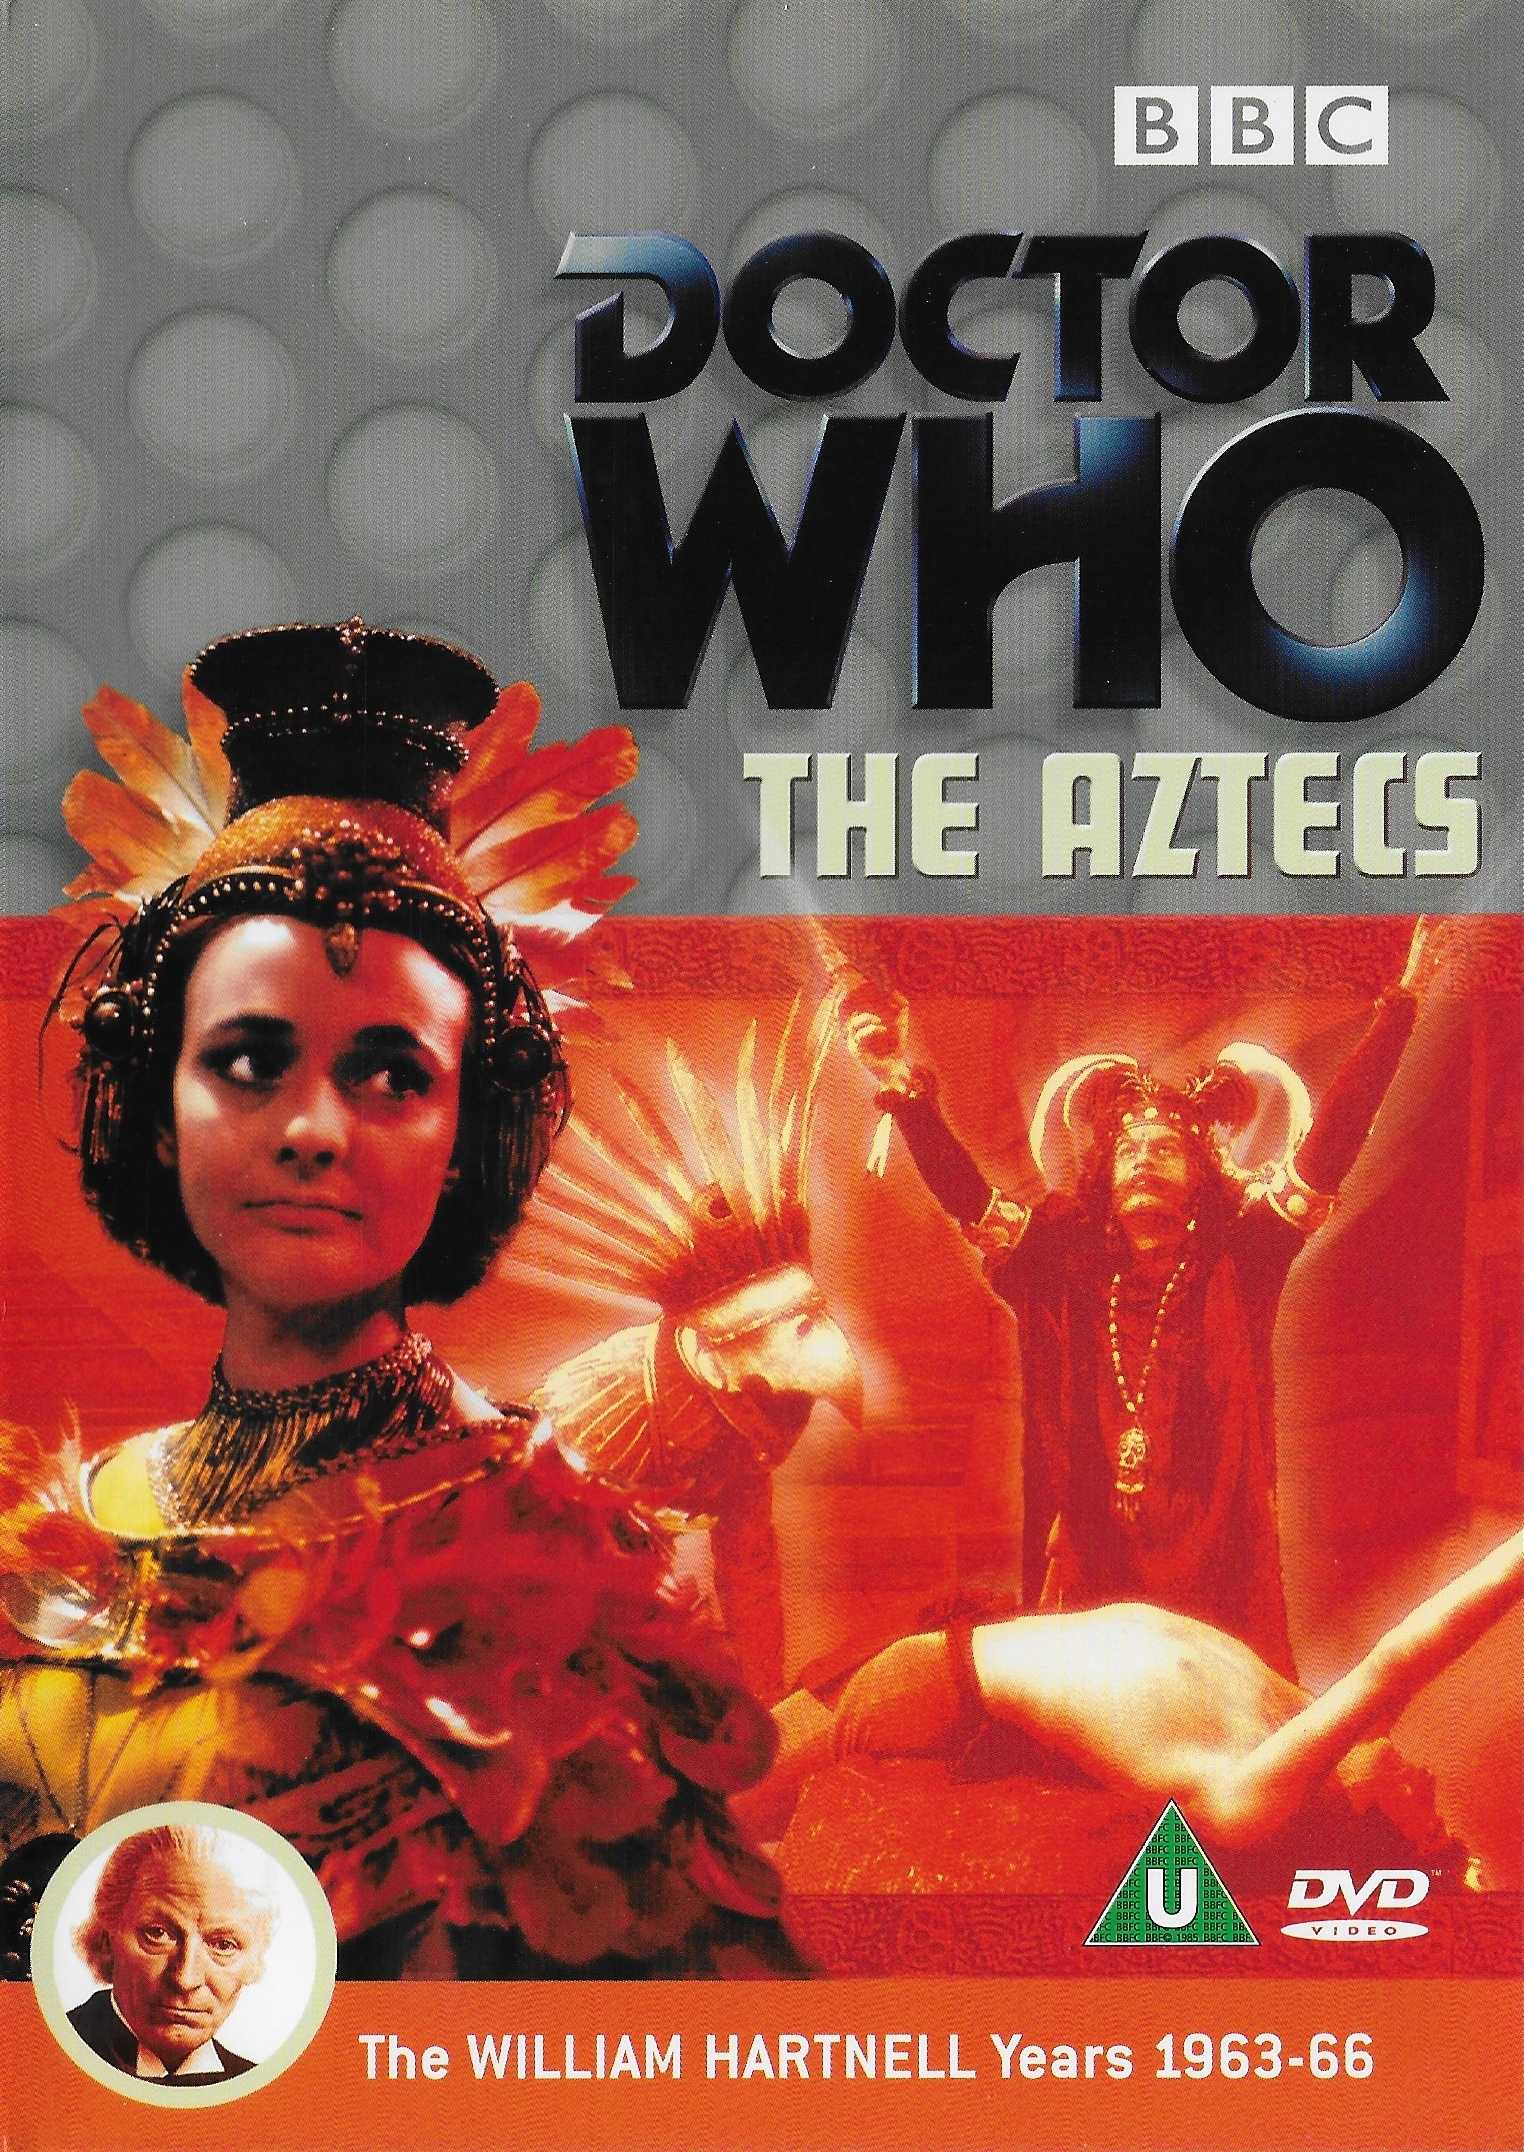 Picture of BBCDVD 1099 Doctor Who - The Aztecs by artist John Lucarotti from the BBC dvds - Records and Tapes library